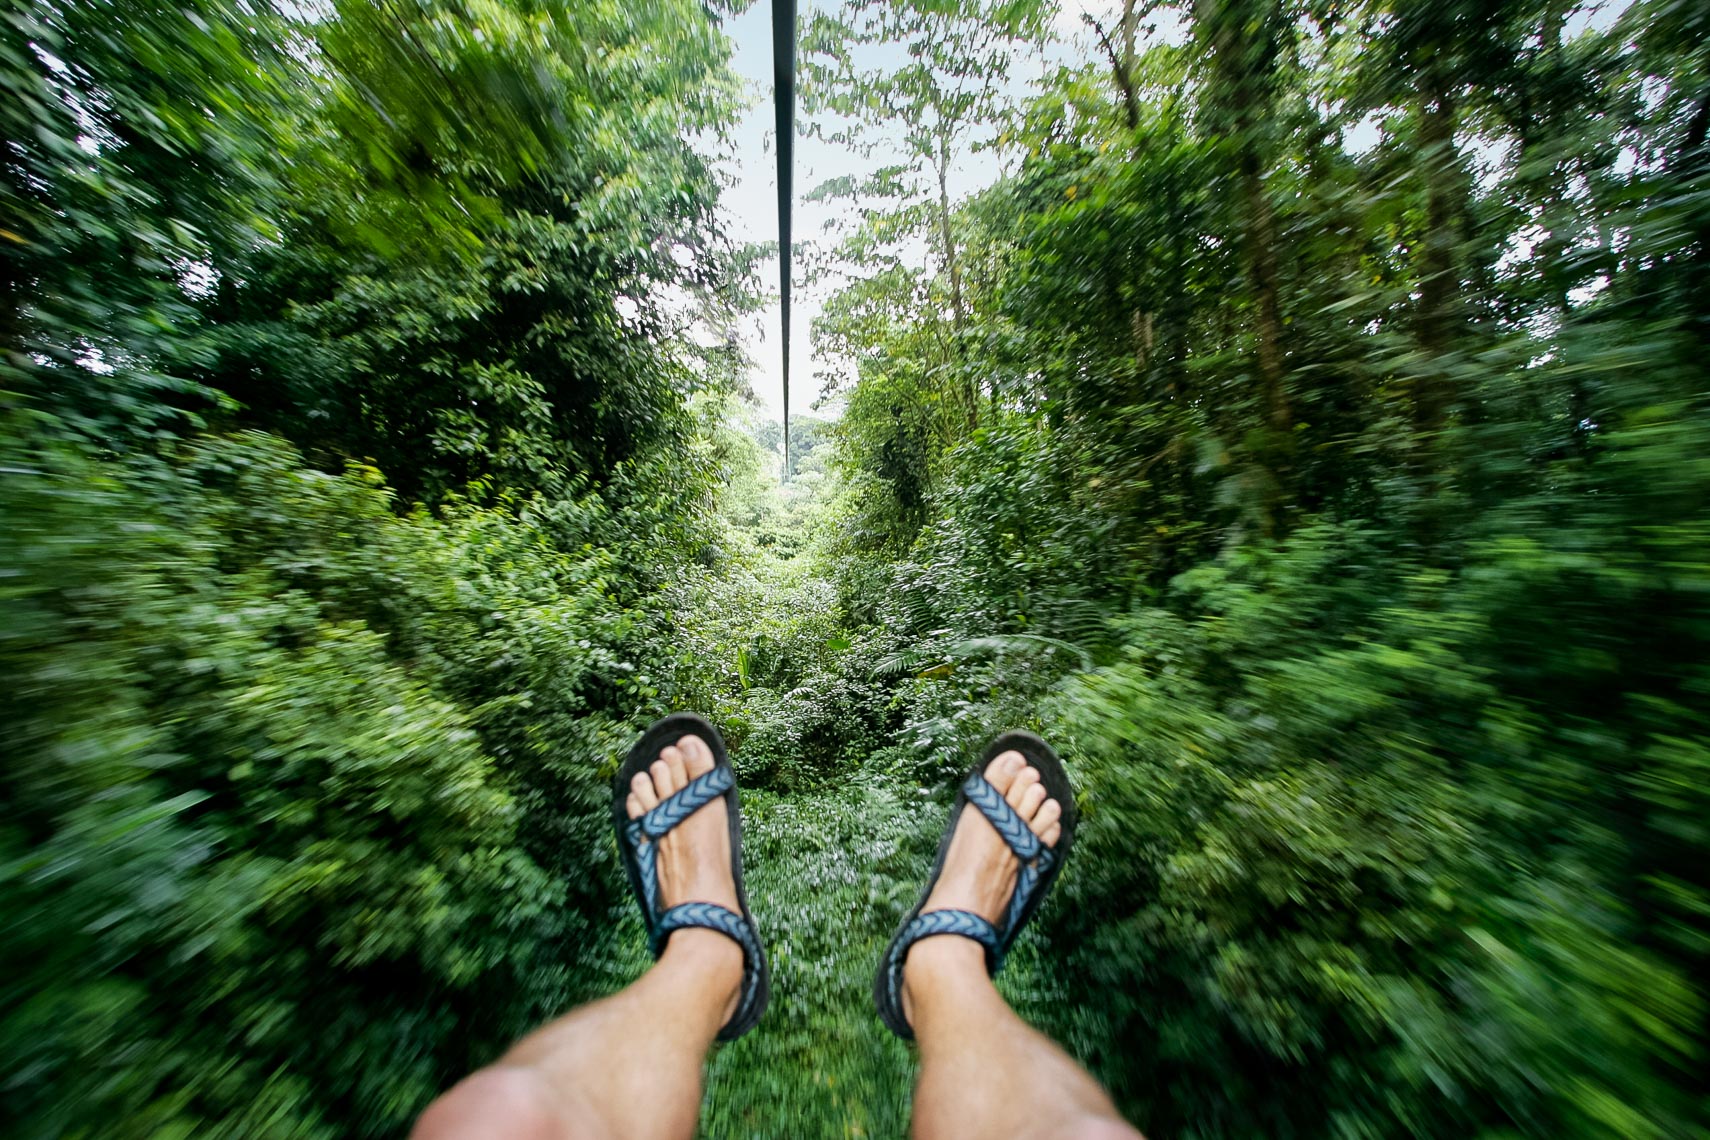 Costa_Rica_Adventurer_for_Rustic_Pathways_20100708_photo_by_Justin_Kase_Conder_2084_Retouched_Tourism.JPG